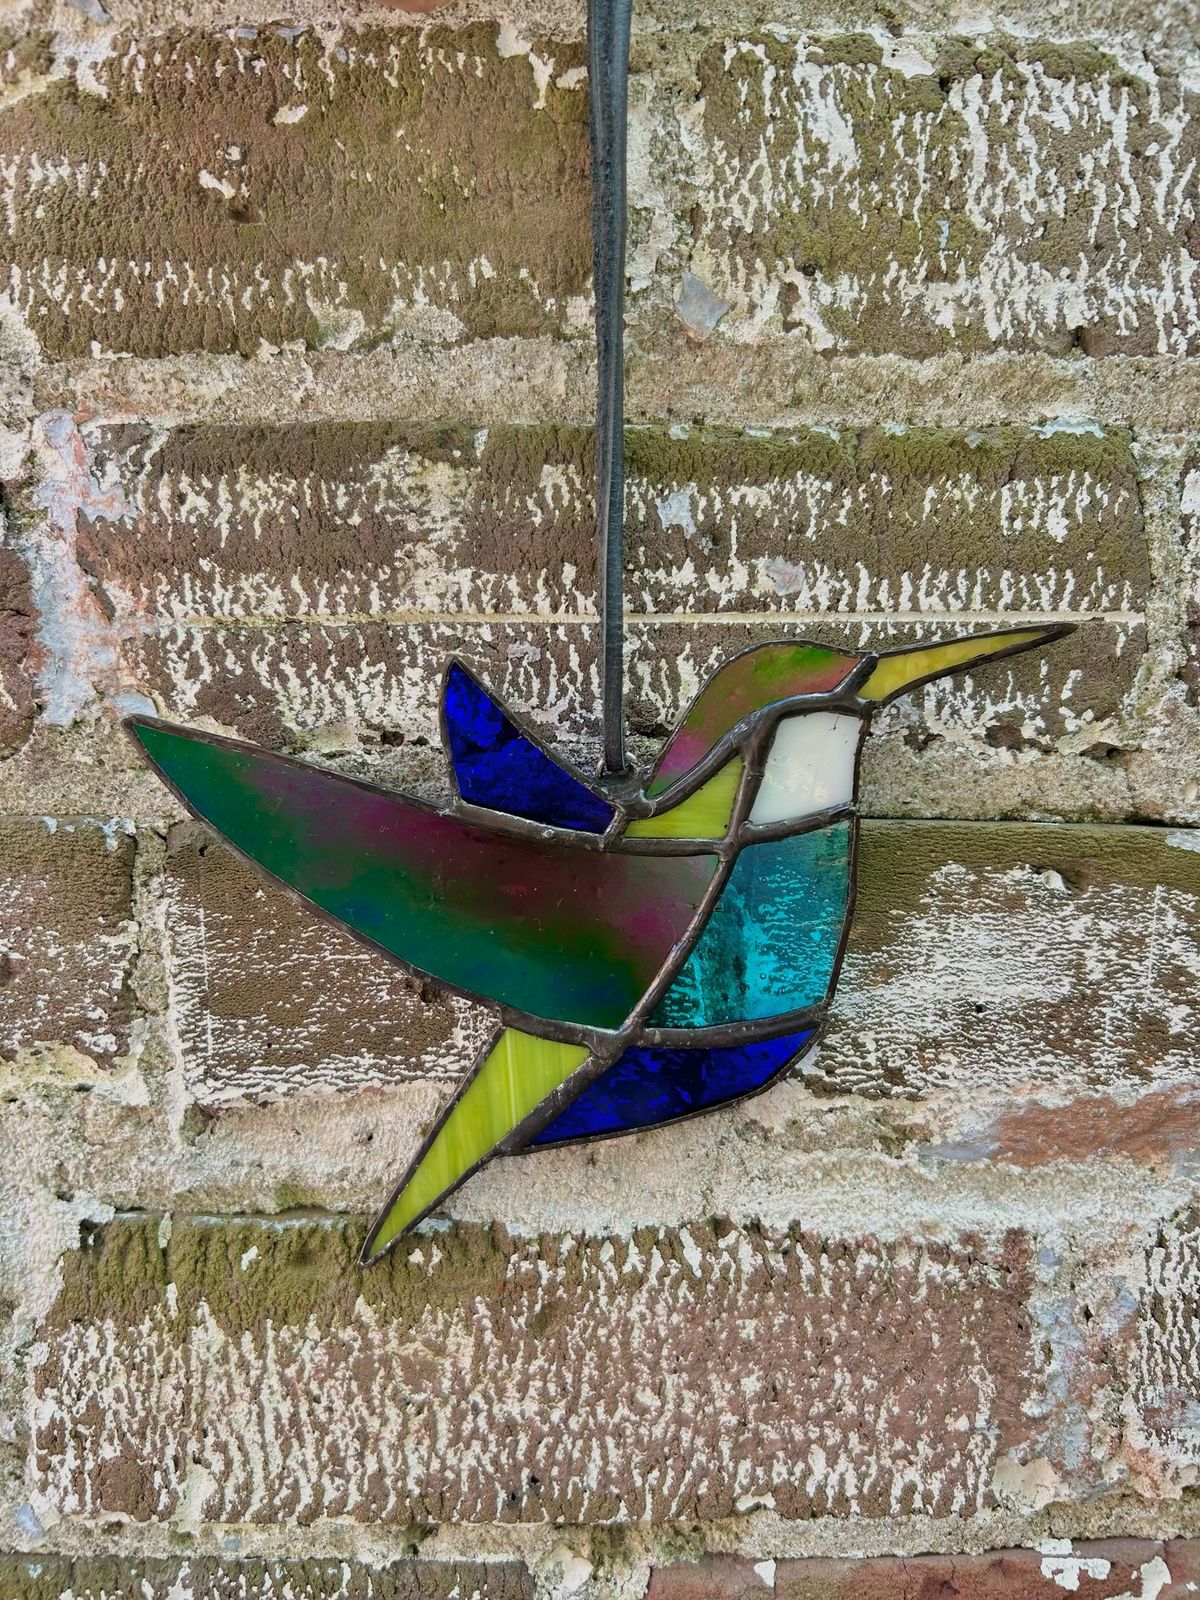 Hummingbird Stained Glass Workshop